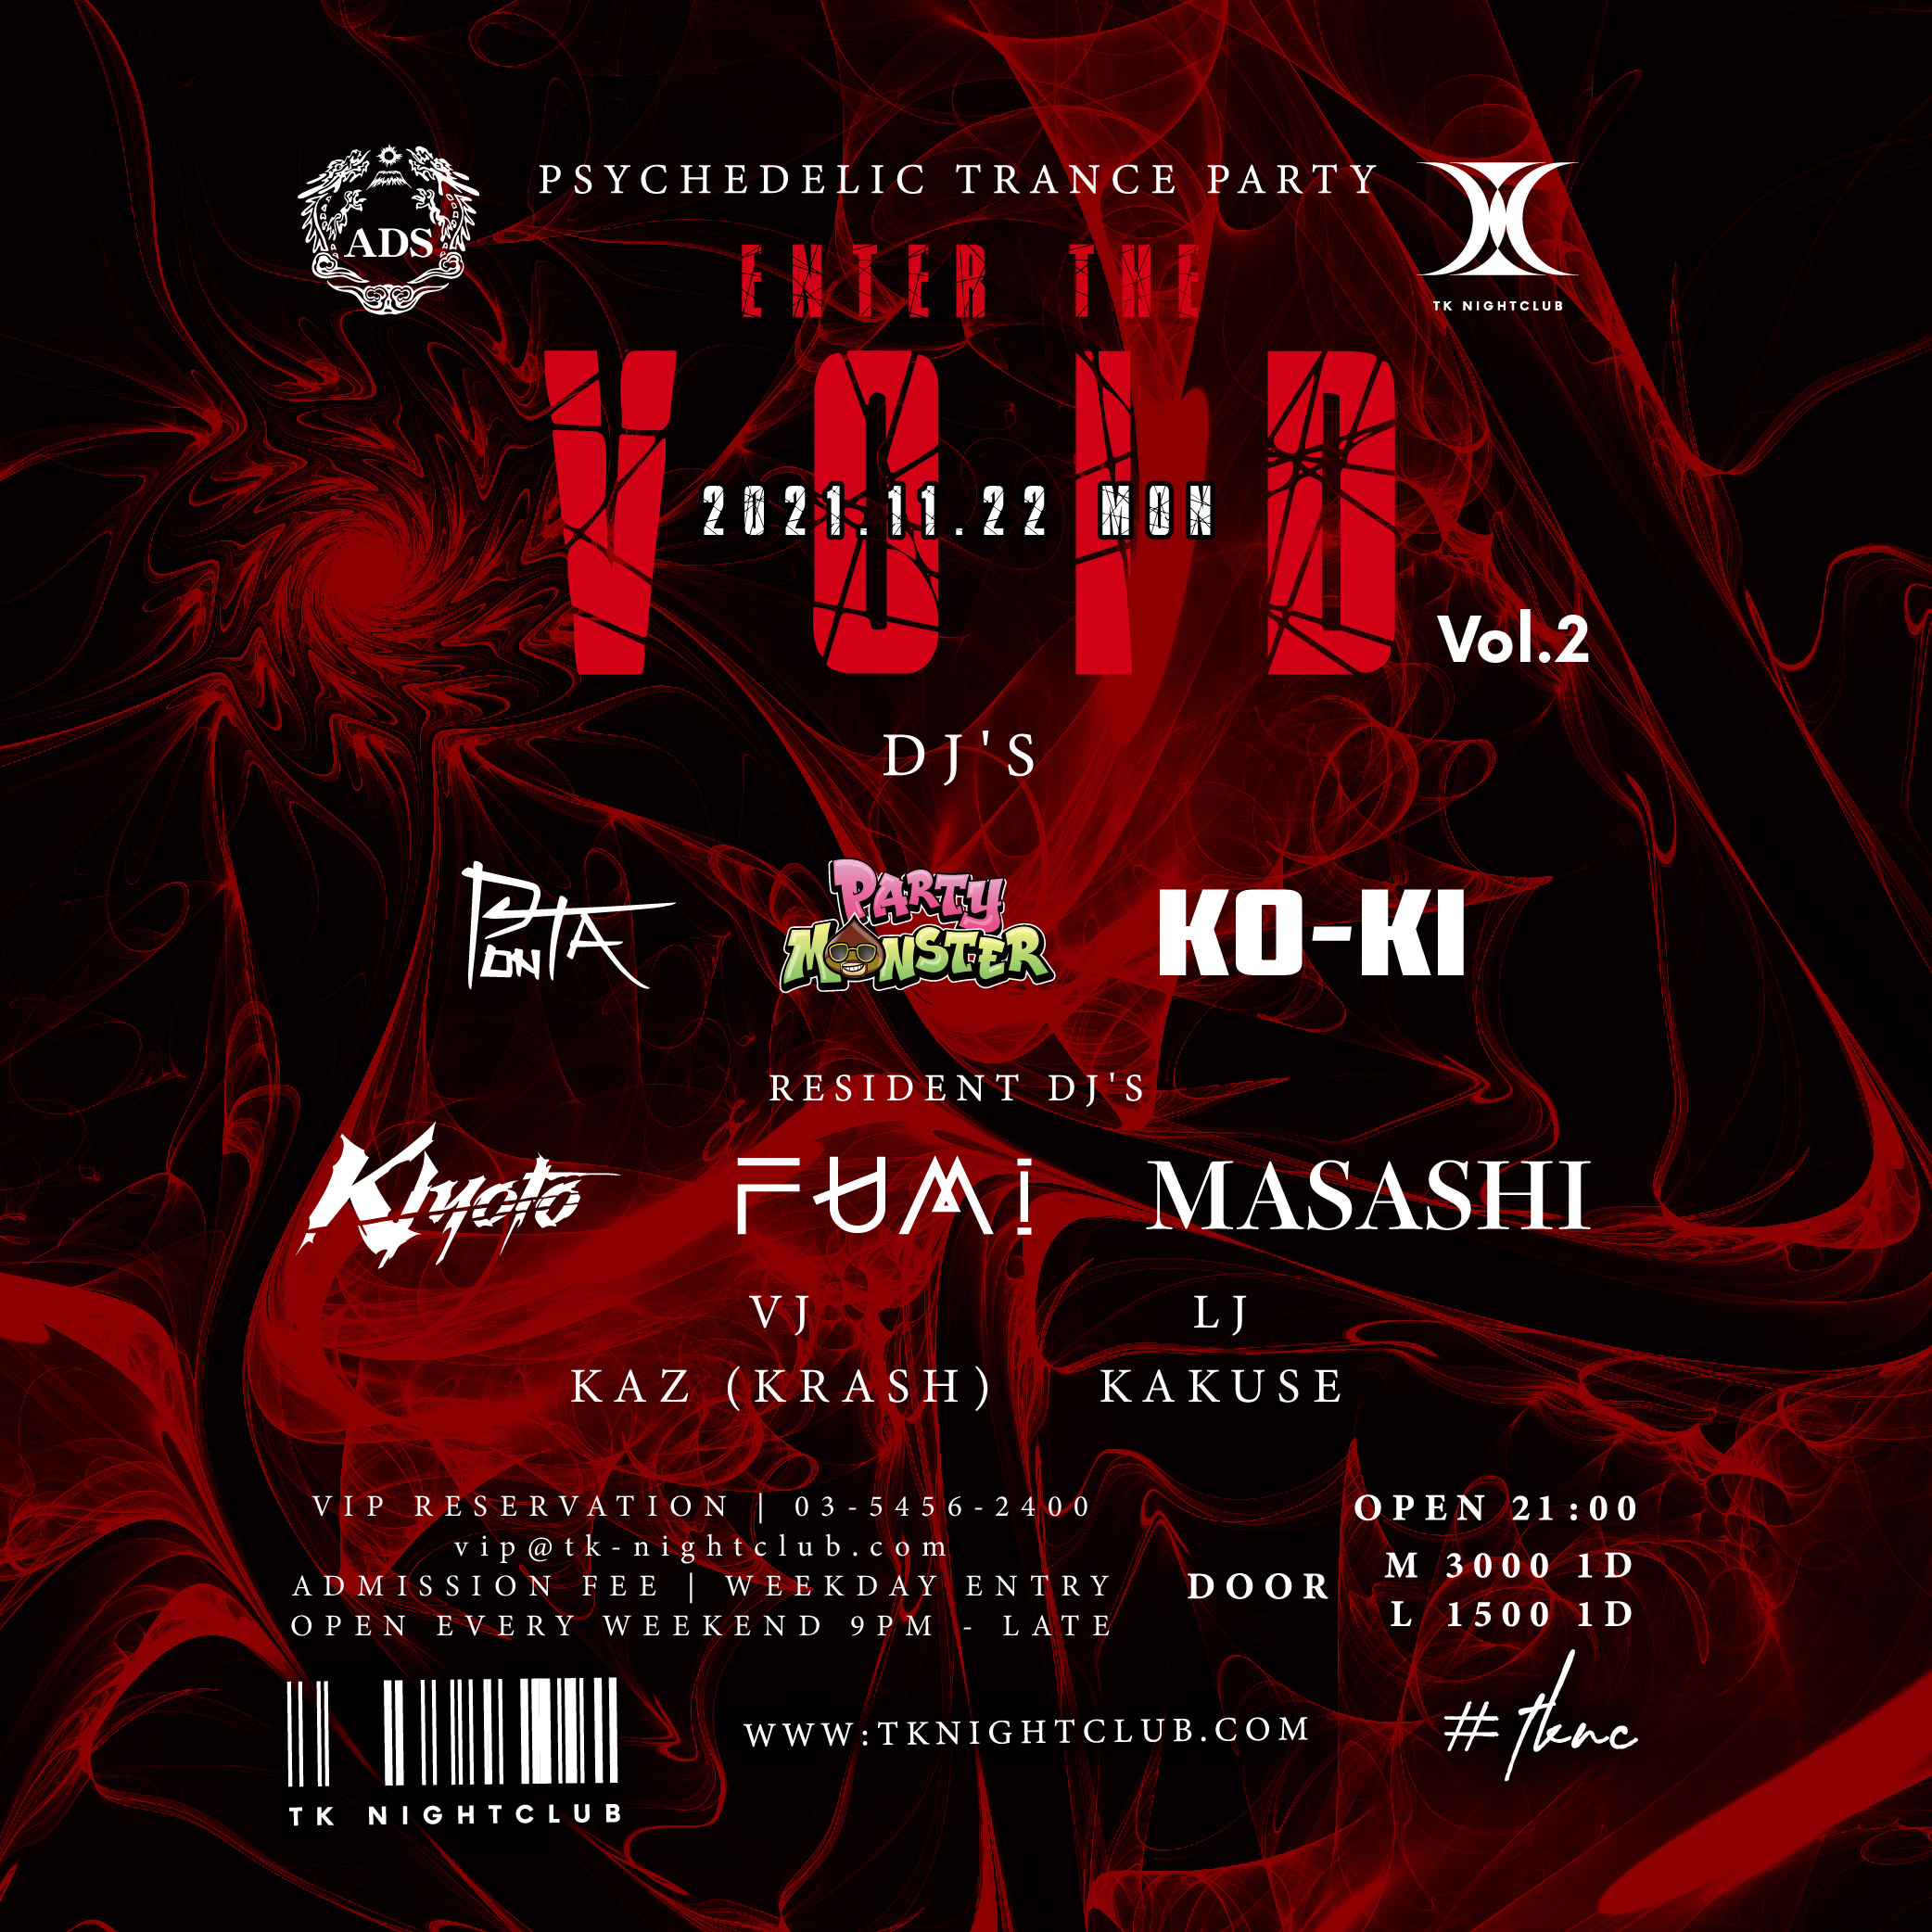 TKNC×ADS ALL PSYTRANCE PARTY Enter The -VOID- Vol.2 LINEUPを公開！